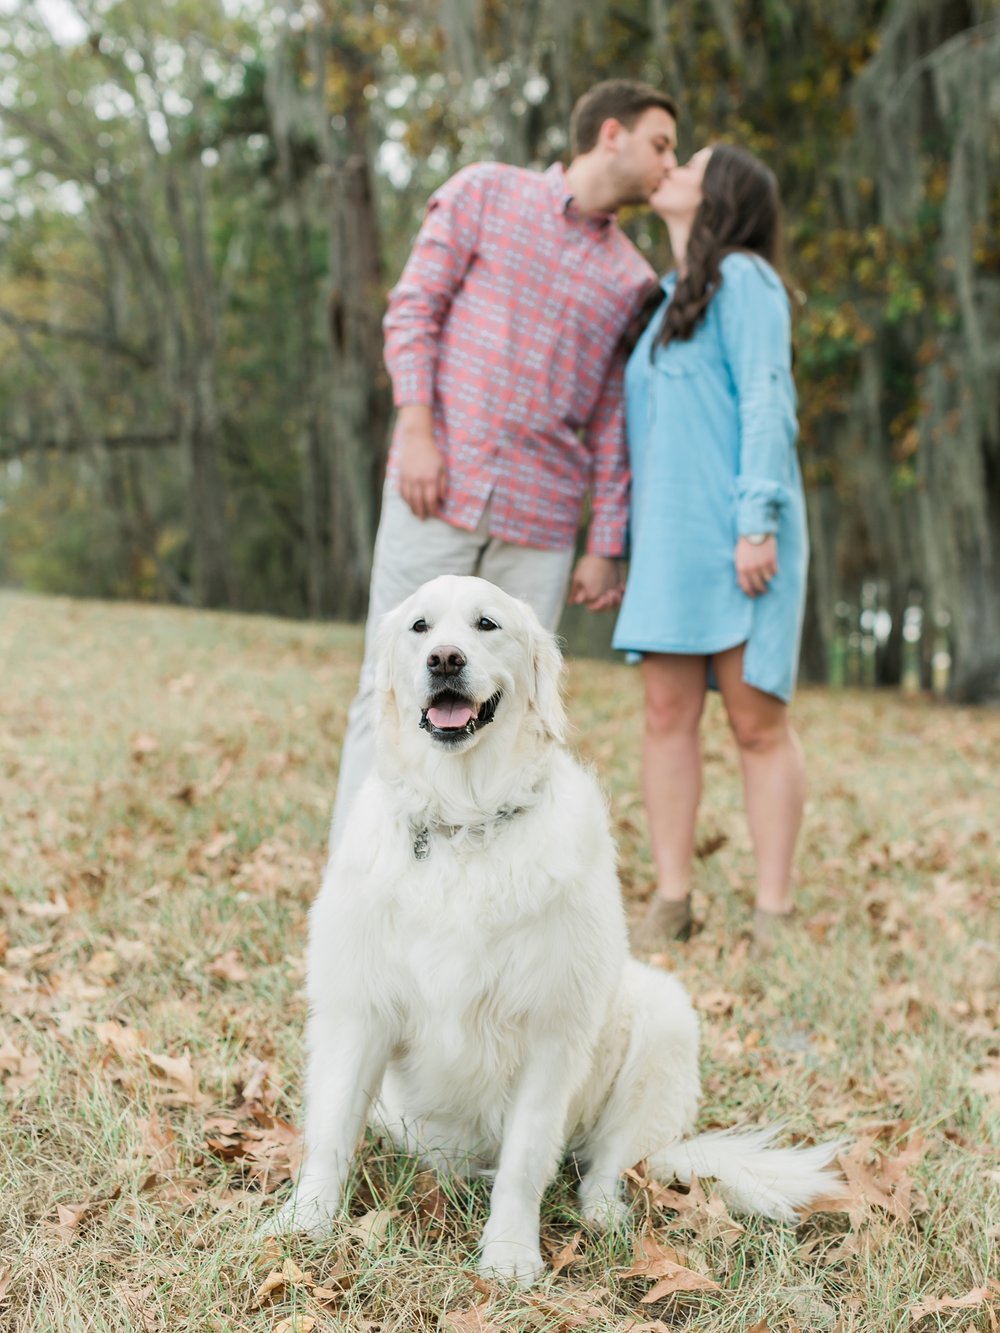  Couple take Engagement Pictures with their cute dog. 